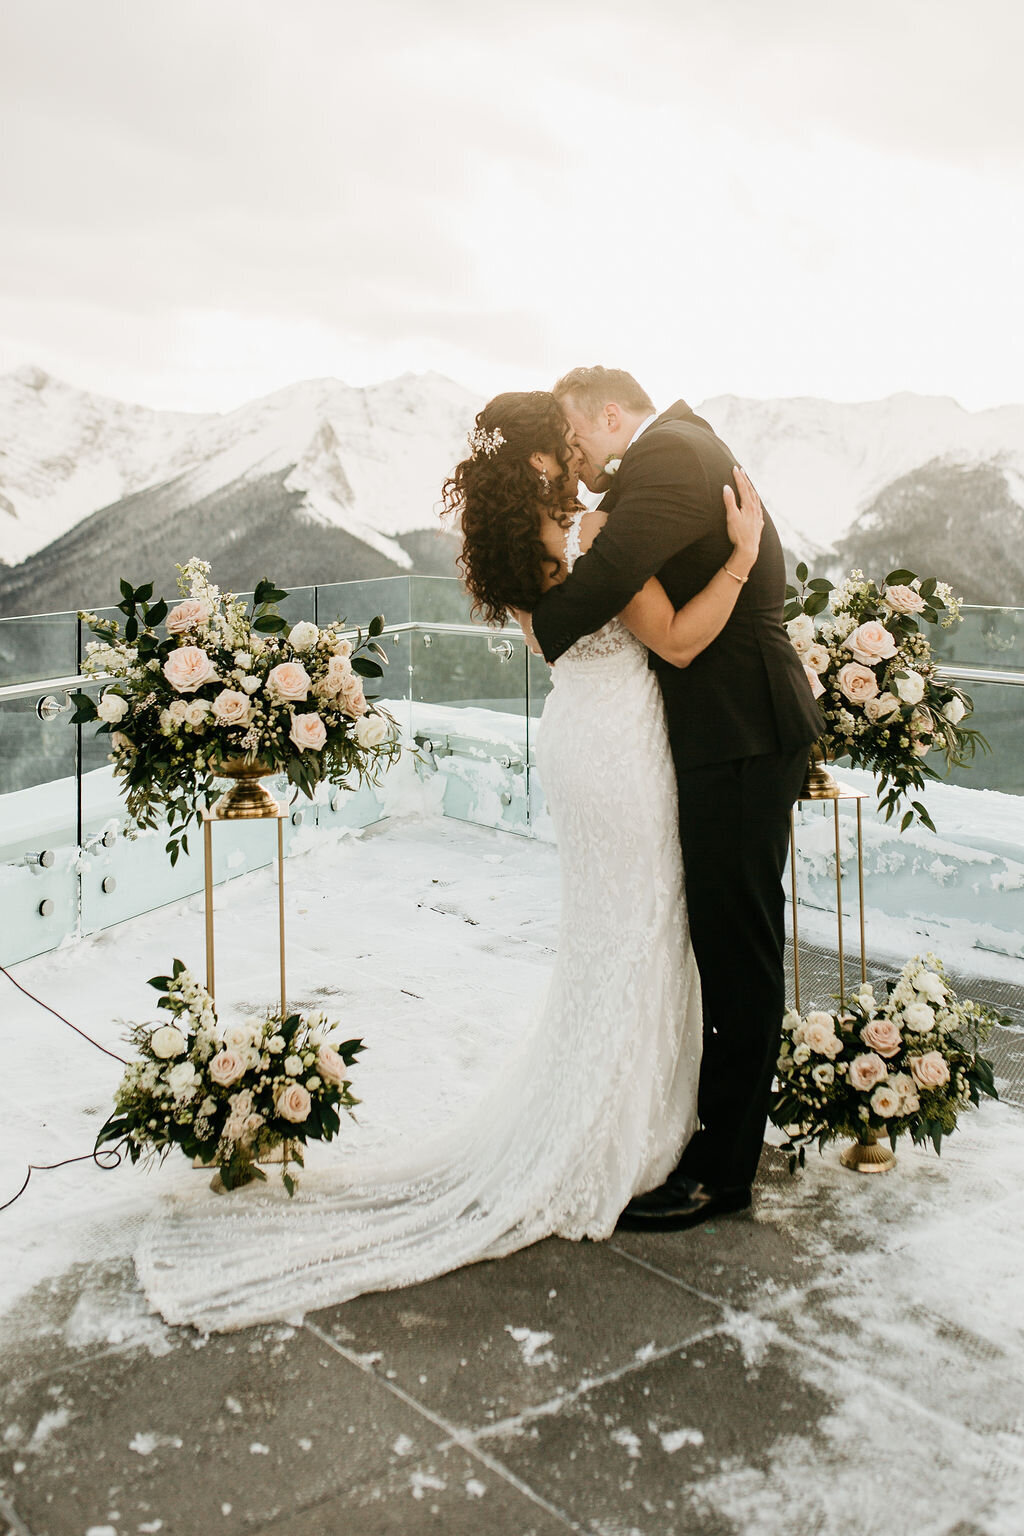 Stunning winter wedding inspiration by Moments by Madeleine, a romantic and elegant wedding planner based in Calgary, Alberta. Featured on the Brontë Bride Vendor Guide.